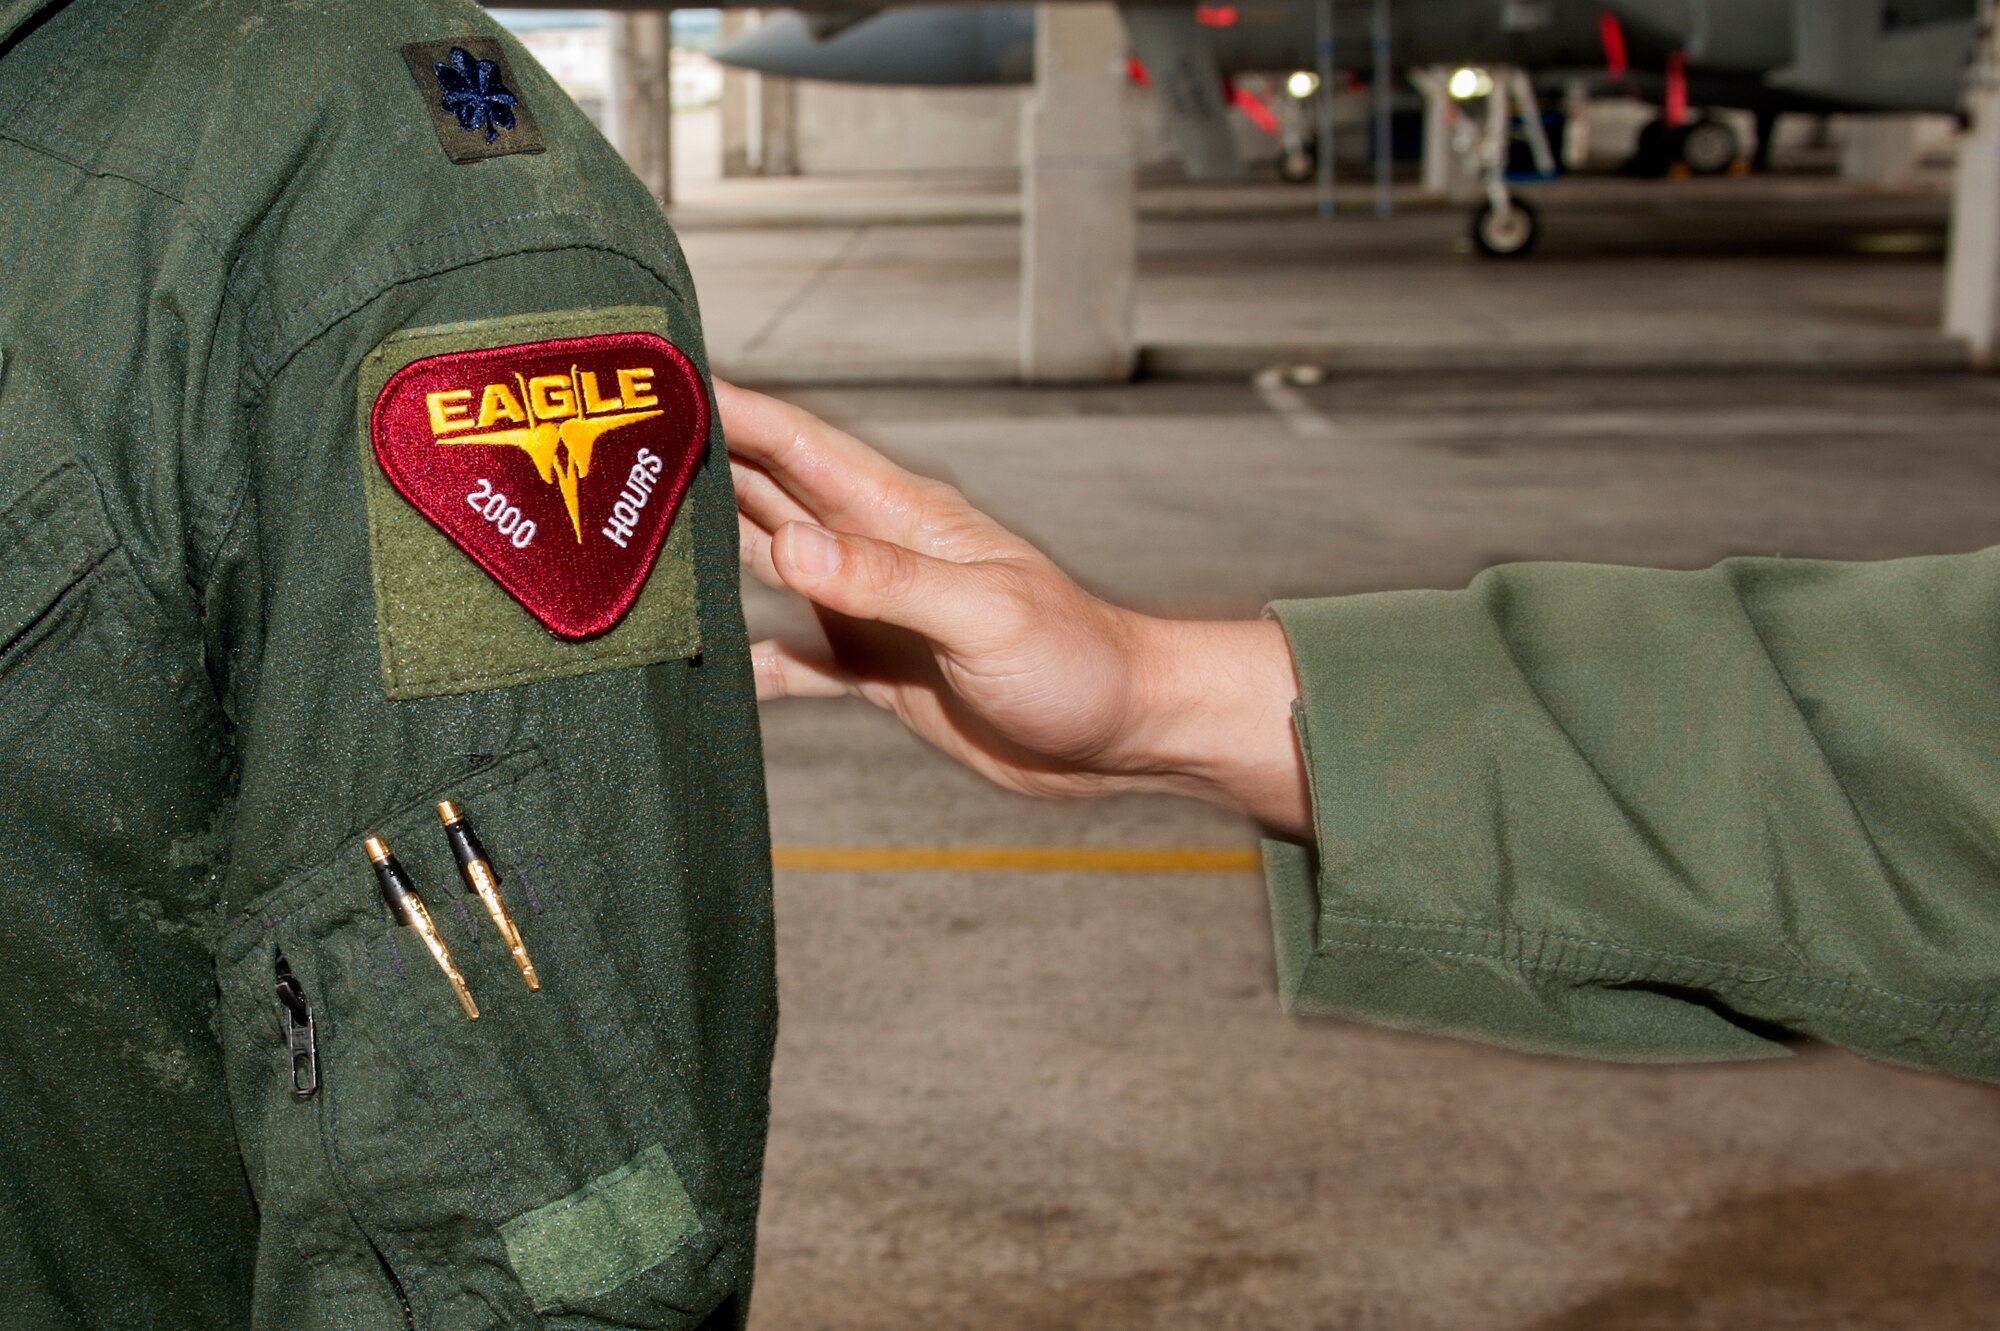 U.S. Air Force Lt. Col. Alexander Haddad, 44th Fighter Squadron pilot, receives a 2,000 flying hour patch from Lt. Col. Kevin Jamieson, 44th FS commander, Nov. 19, 2015, at Kadena Air Base, Japan. Reaching 2,000 flying hours as an F-15 Eagle pilot is a rare occurrence because routine training flights usually last around 45 minutes to an hour. (U.S. Air Force photo by Airman 1st Class Corey M. Pettis)